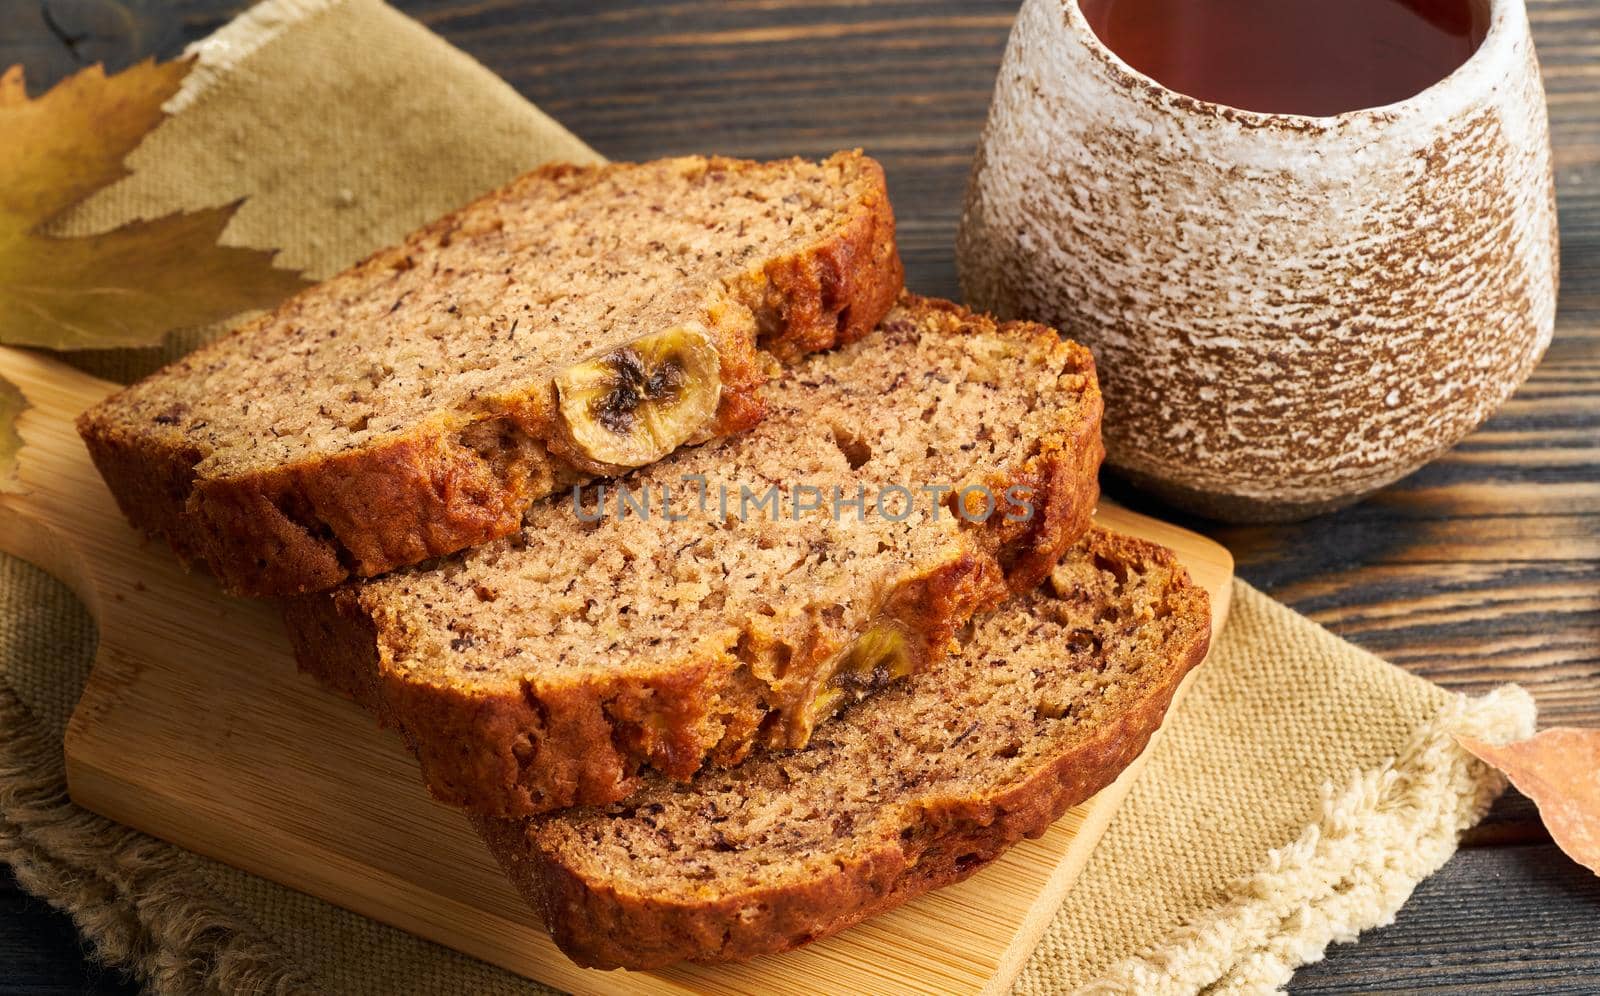 Autumn food-slices of banana bread, a Cup of tea, dry leaves, a dark wooden table. Side view, close up